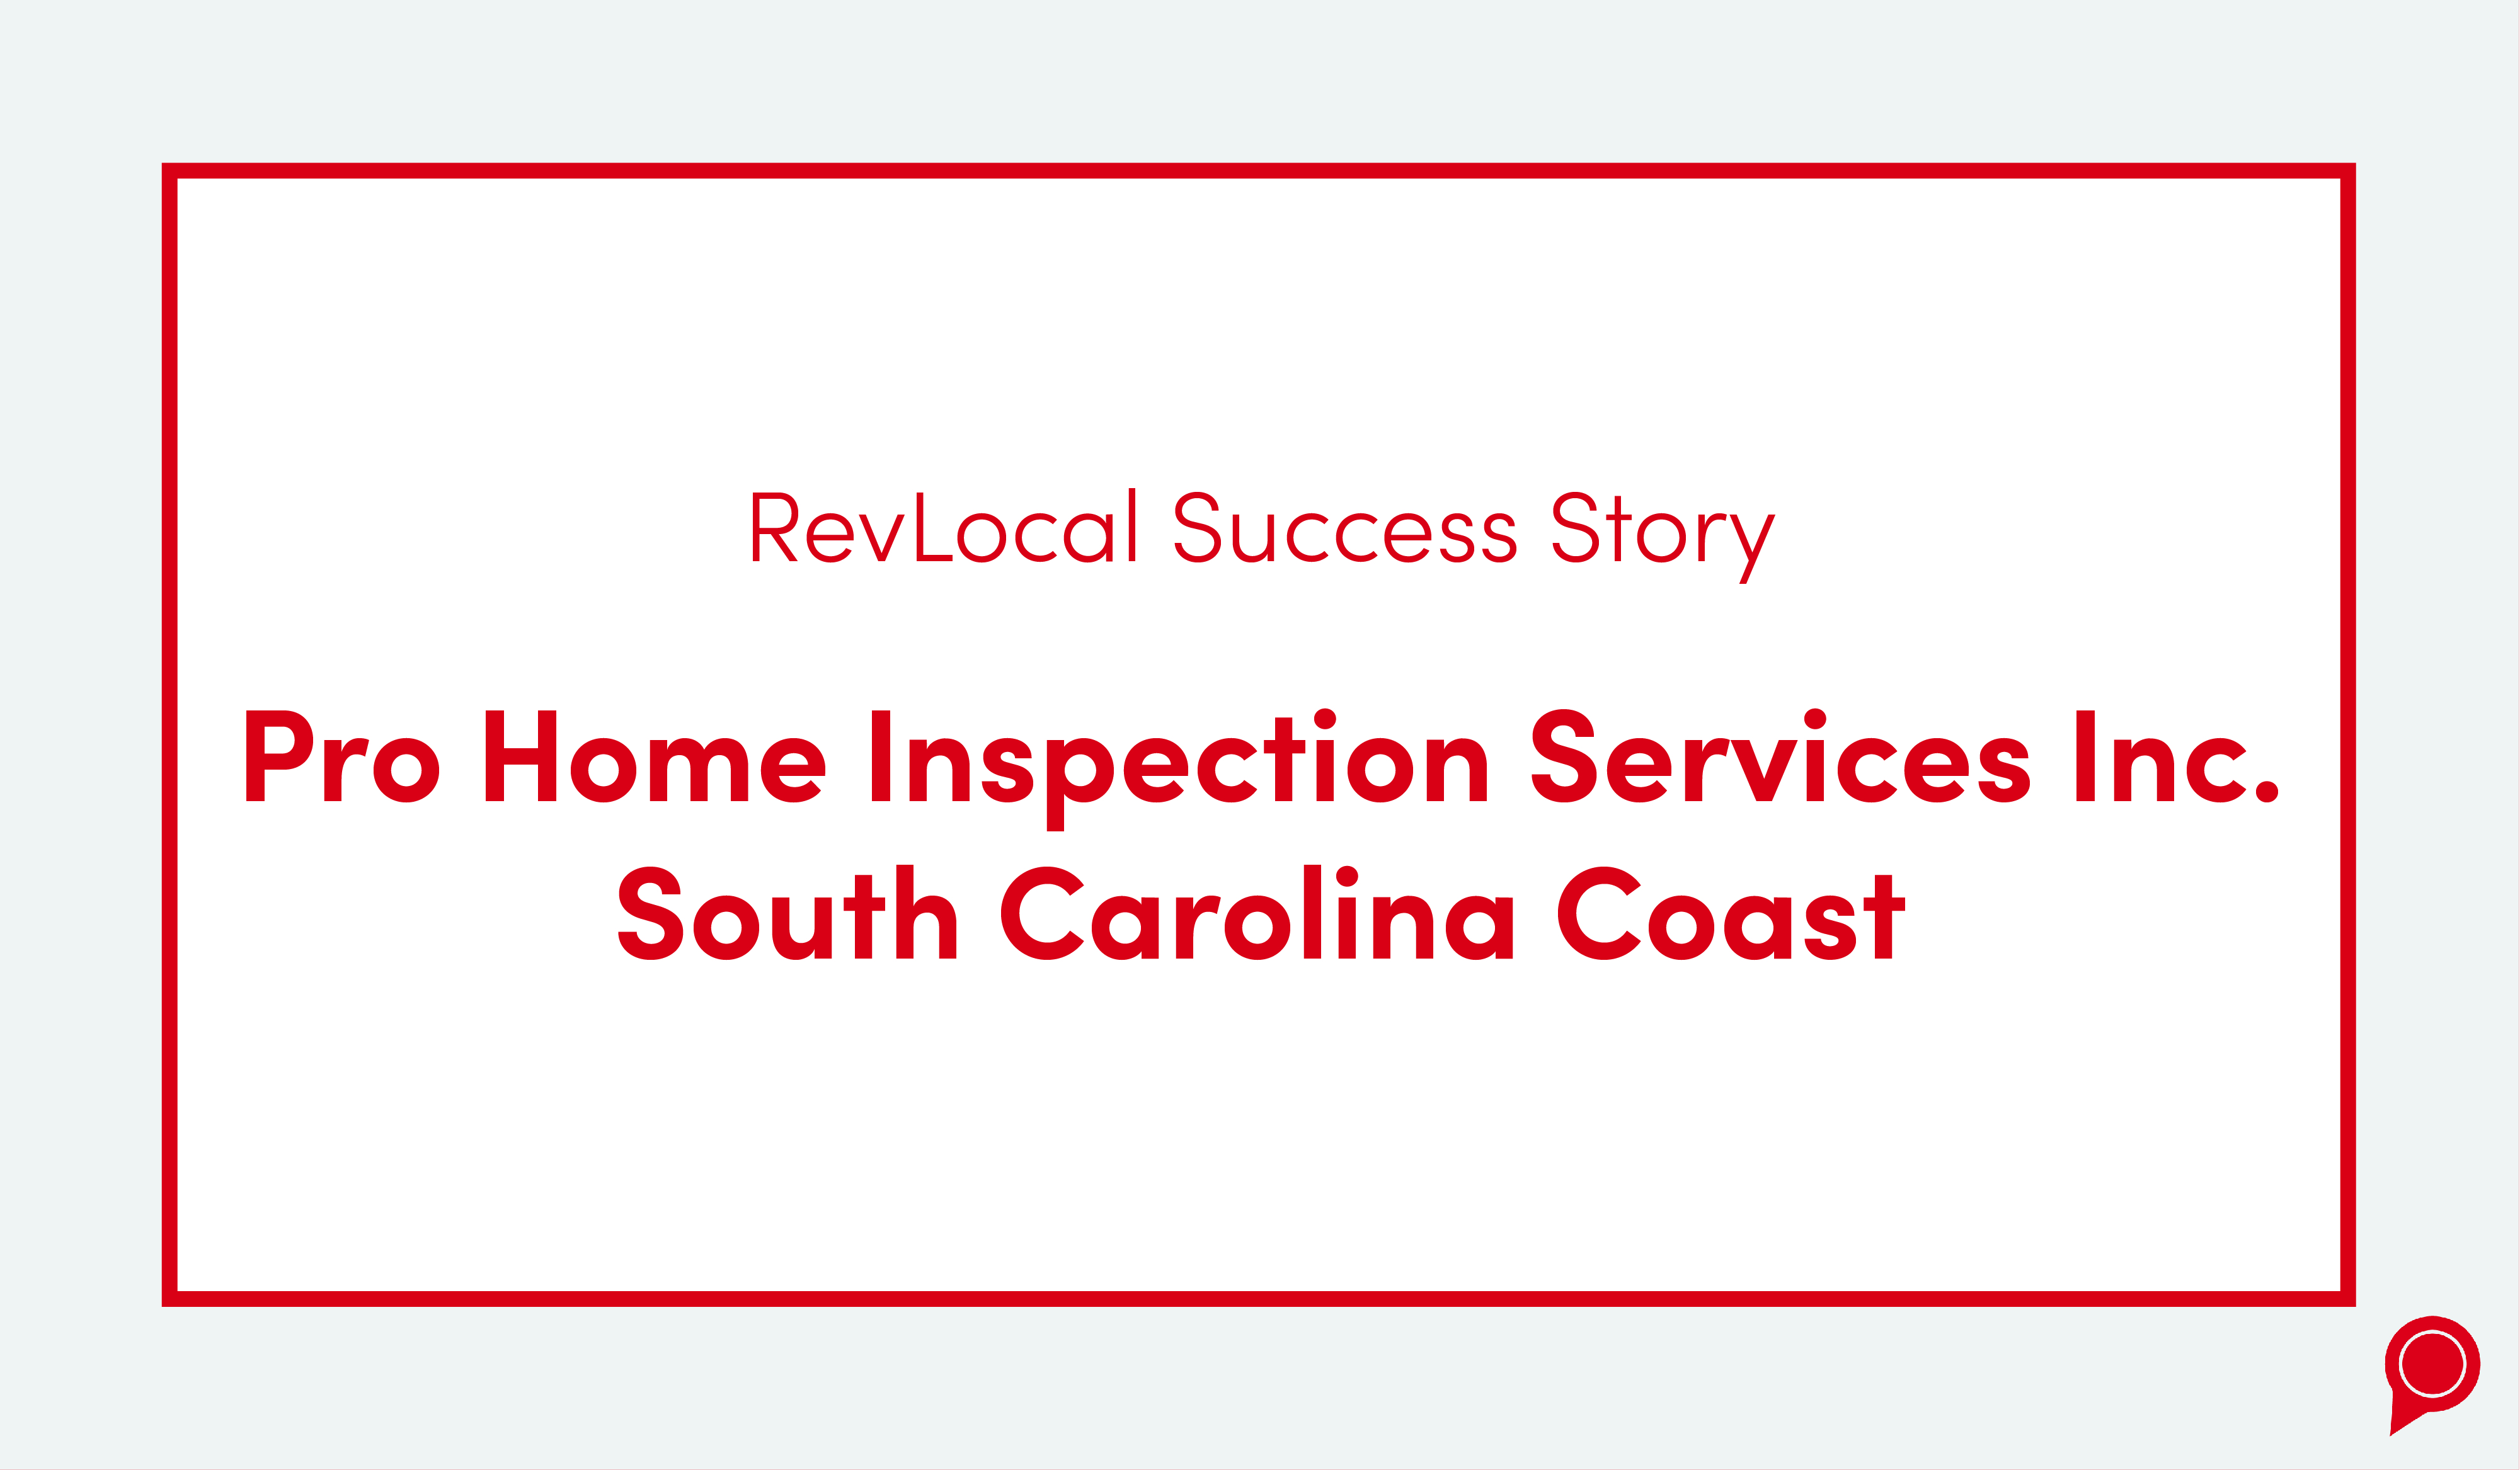 RevLocal success story Pro Home Inspection Services In. South Carolina coast